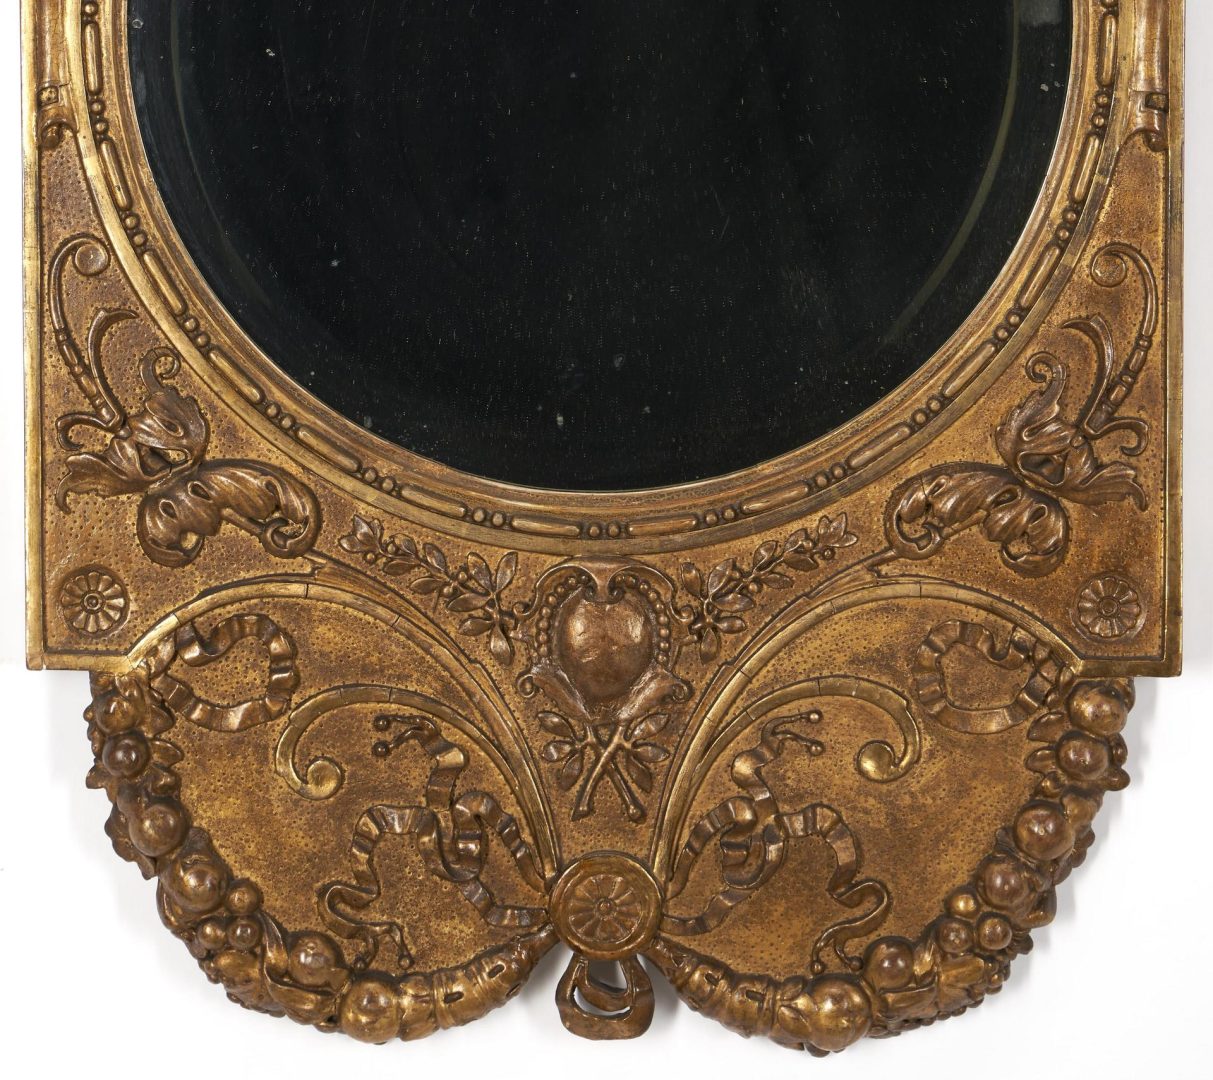 Lot 163: Near Pair French Carved Giltwood Mirrors, after Jacob Desmalter